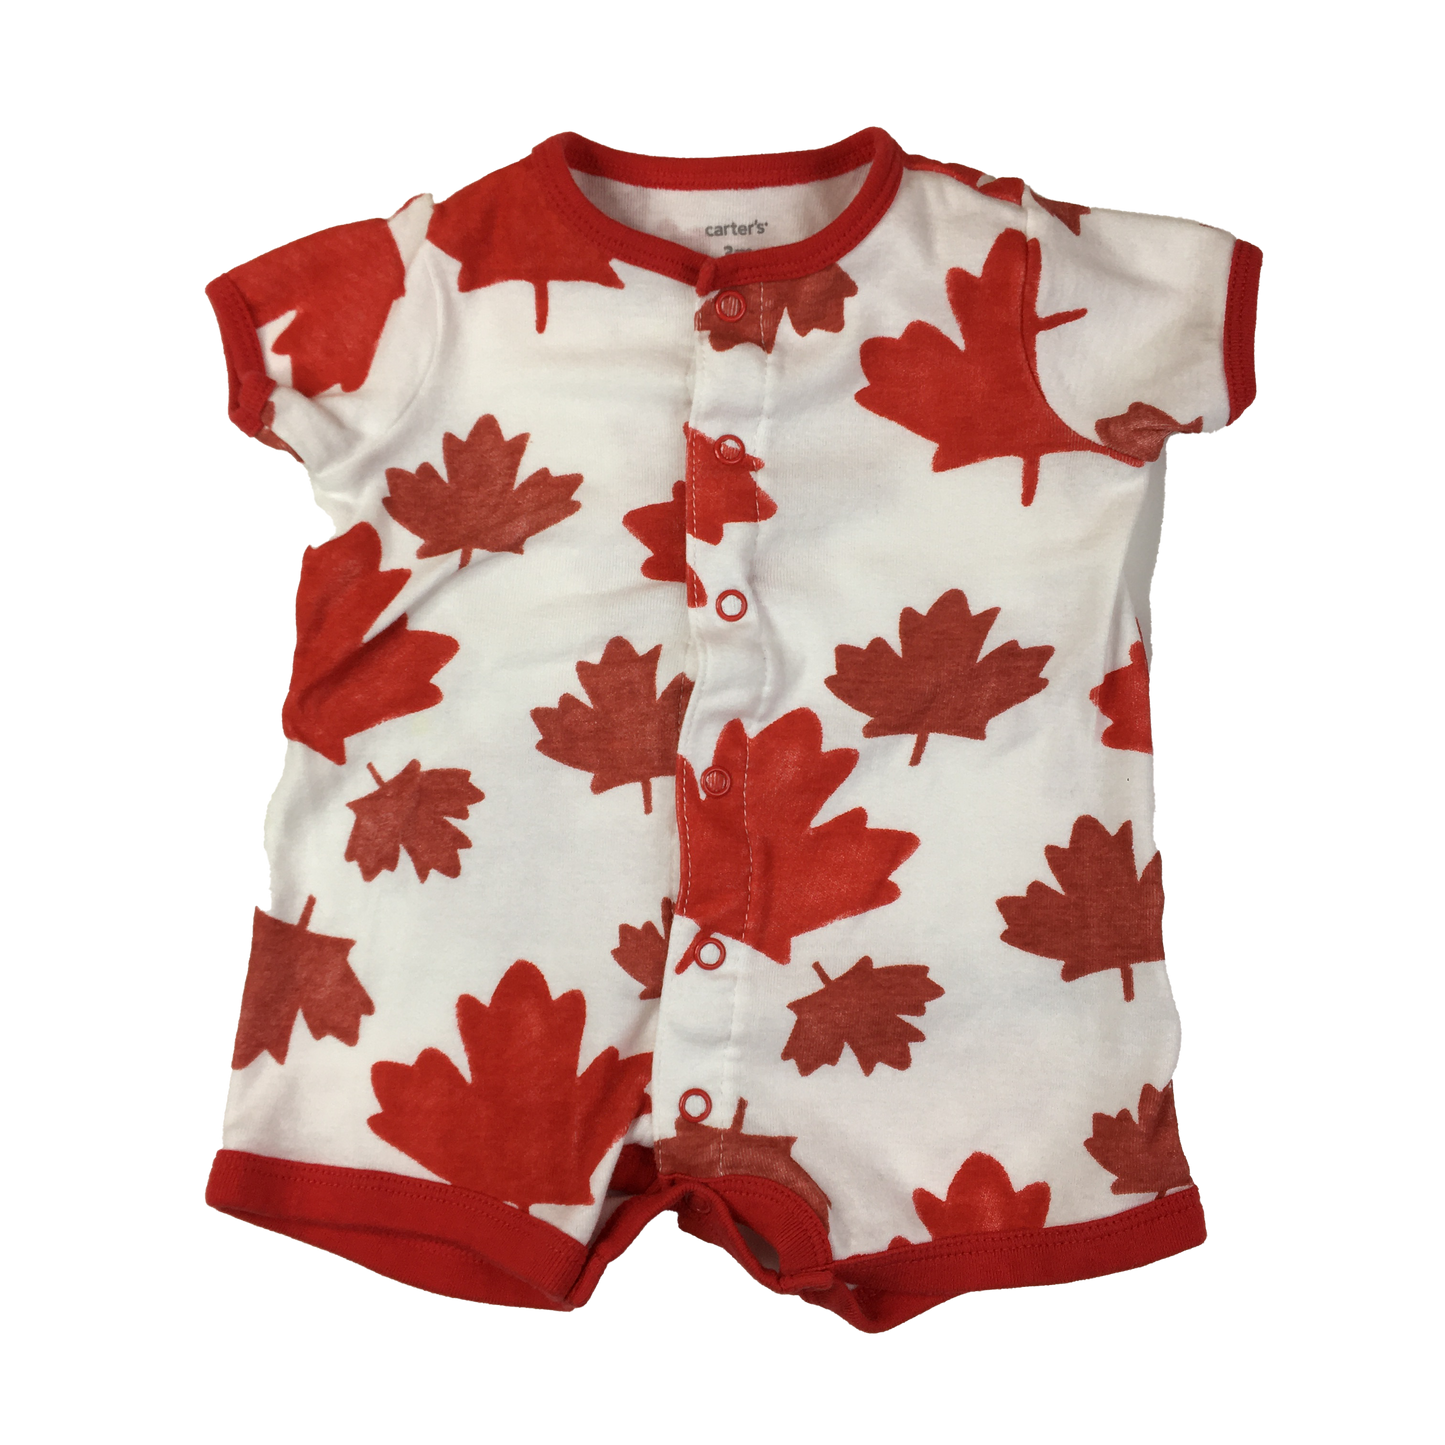 Carter's Red & White Romper with Maple Leaf Print 3M